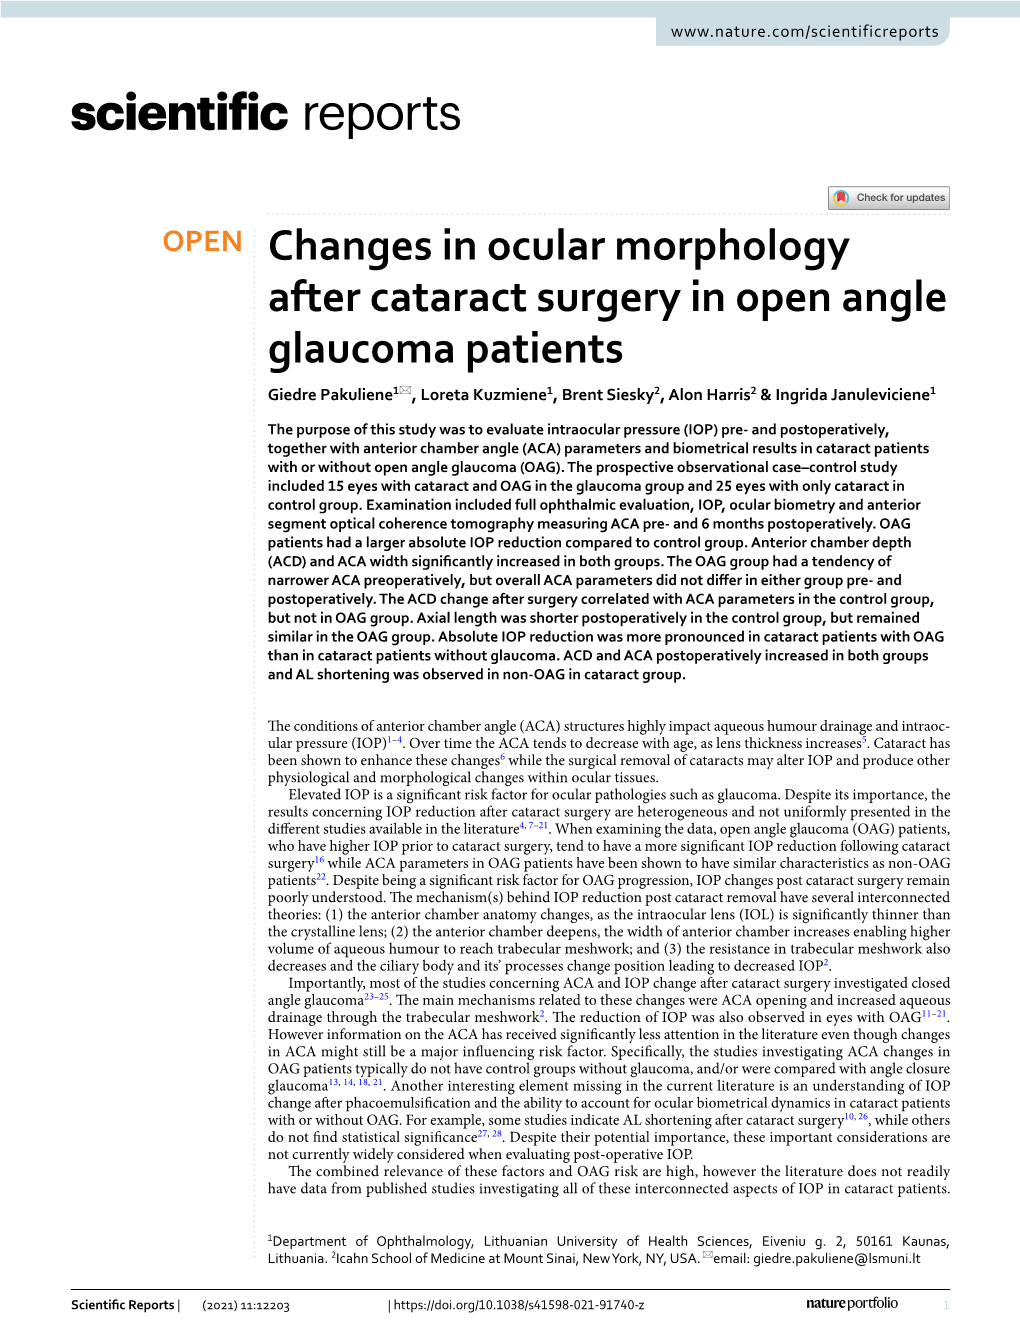 Changes in Ocular Morphology After Cataract Surgery in Open Angle